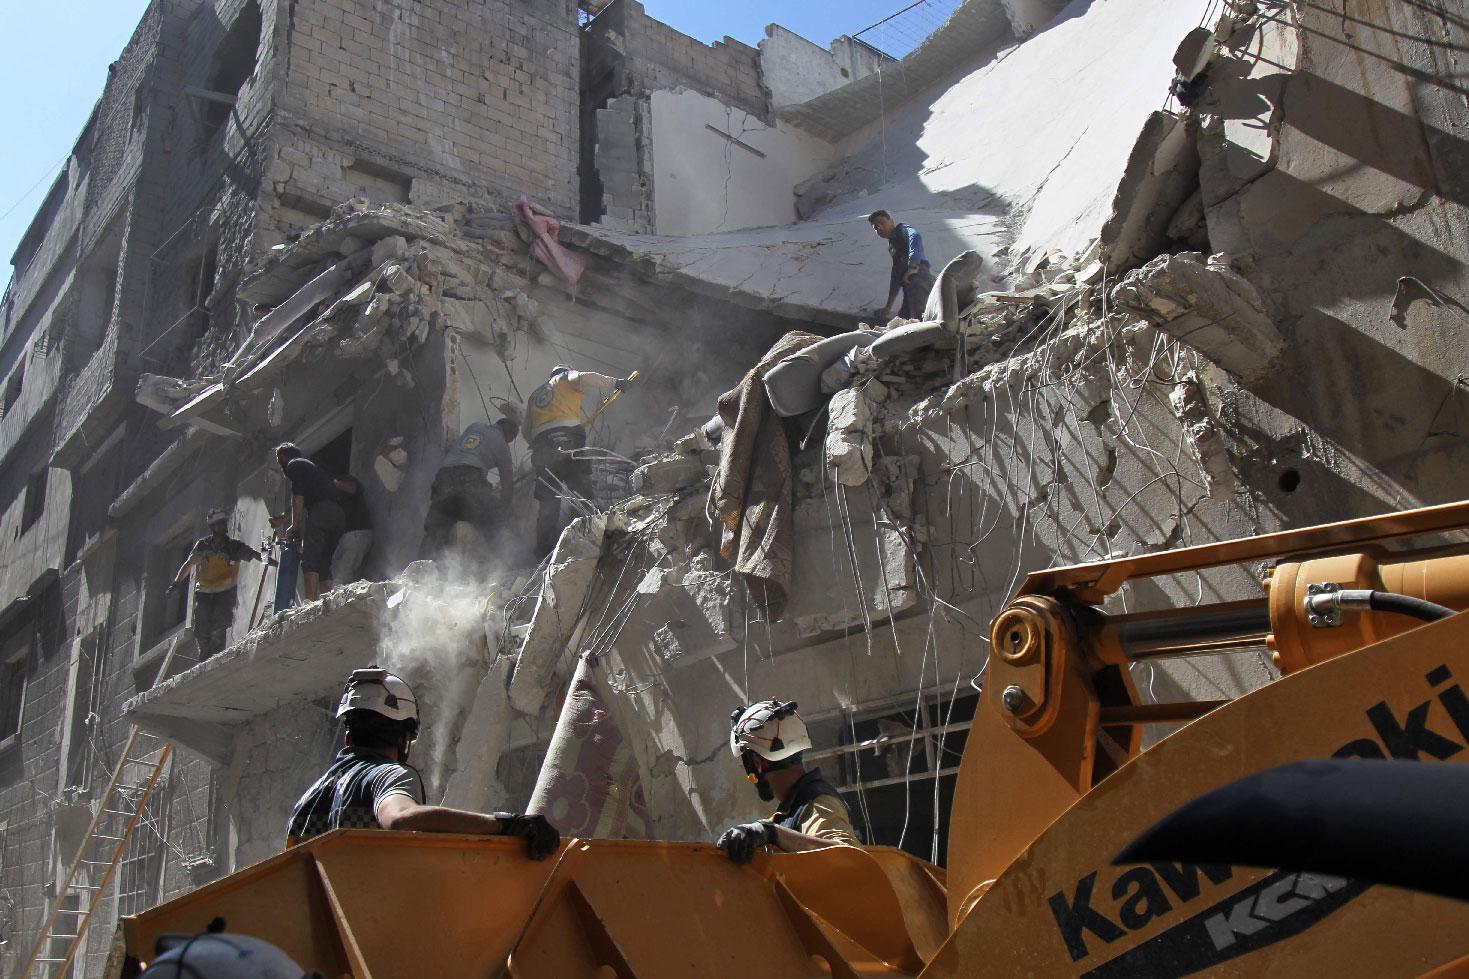 White helmet rescue volunteers and civilians search for survivors amidst the rubble of a building